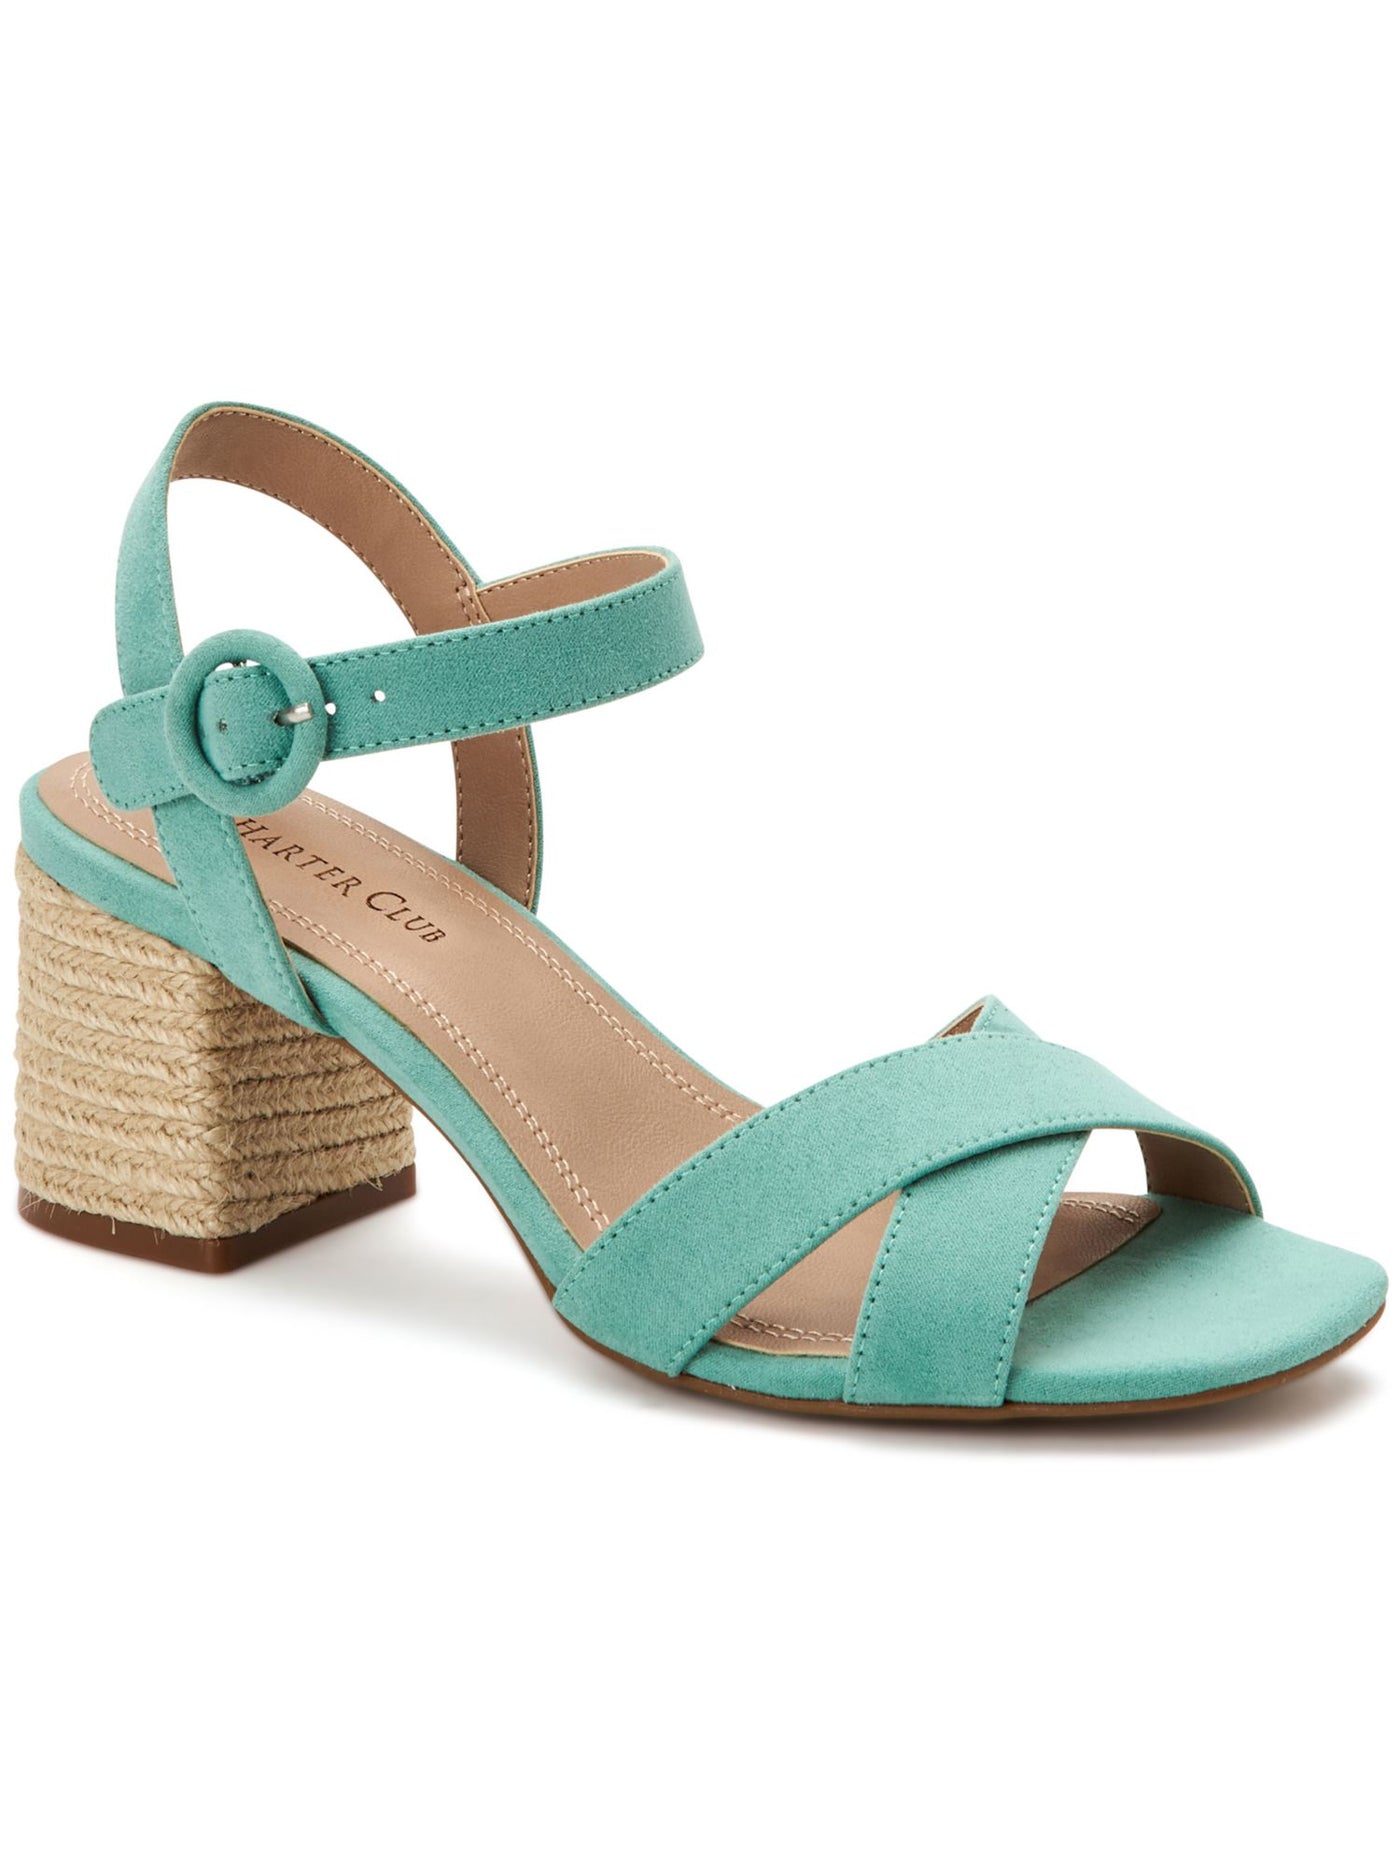 CHARTER CLUB Womens Turquoise Crisscross Straps Espadrille Heel Strappy Ankle Strap Padded Rioo Square Toe Block Heel Buckle Dress Slingback Sandal 8.5 M